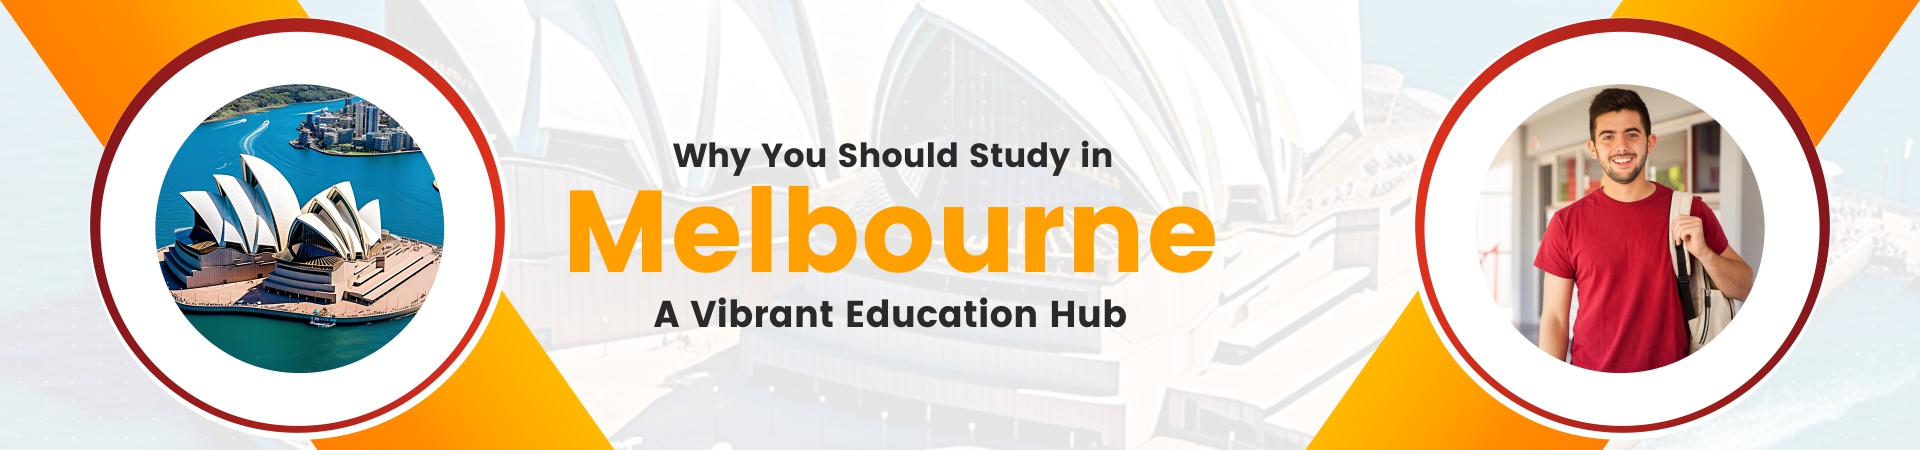 Why You Should Study in Melbourne: A Vibrant Education Hub